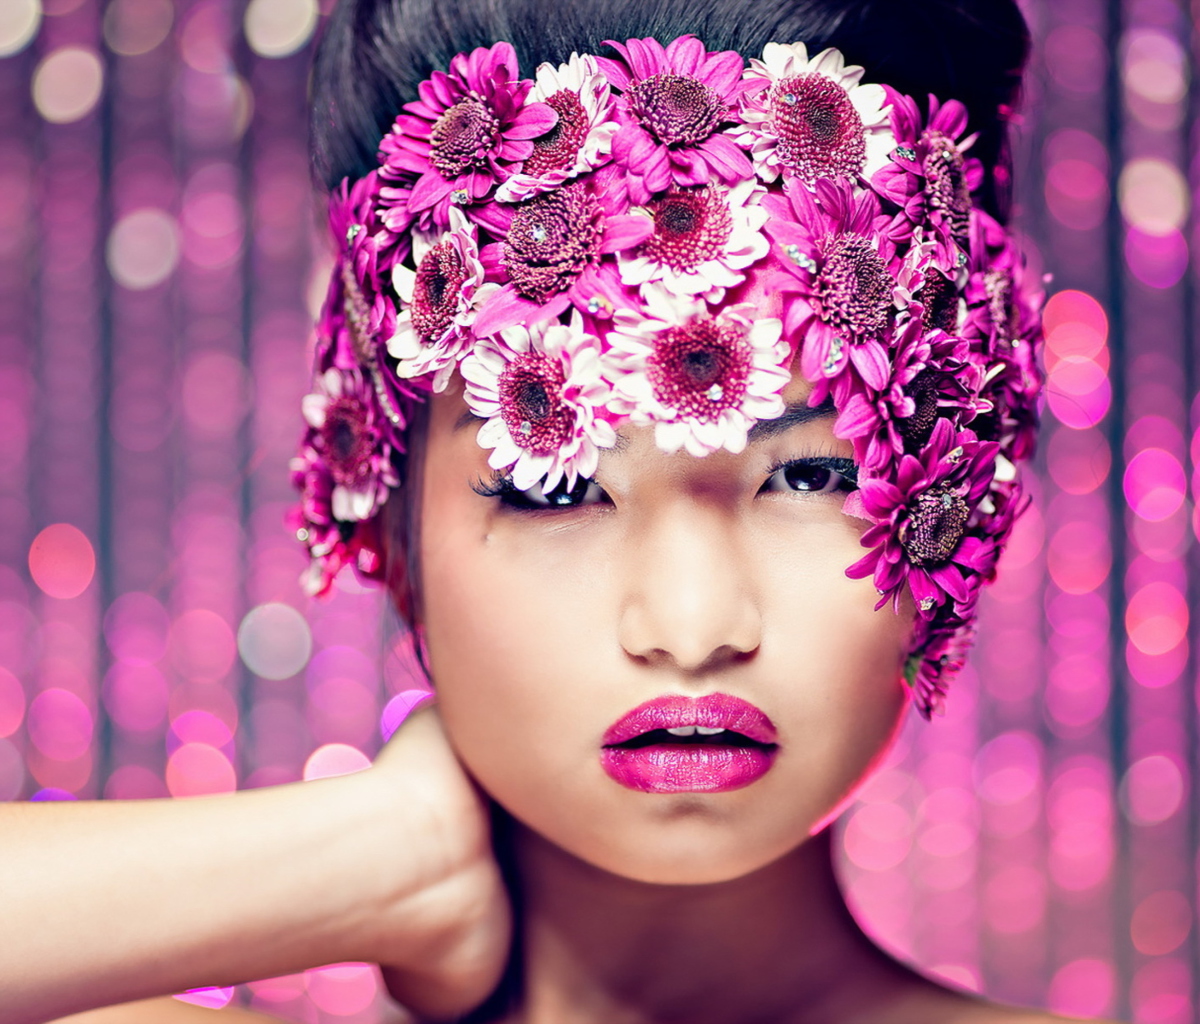 Asian Fashion Model With Pink Flower Wreath wallpaper 1200x1024